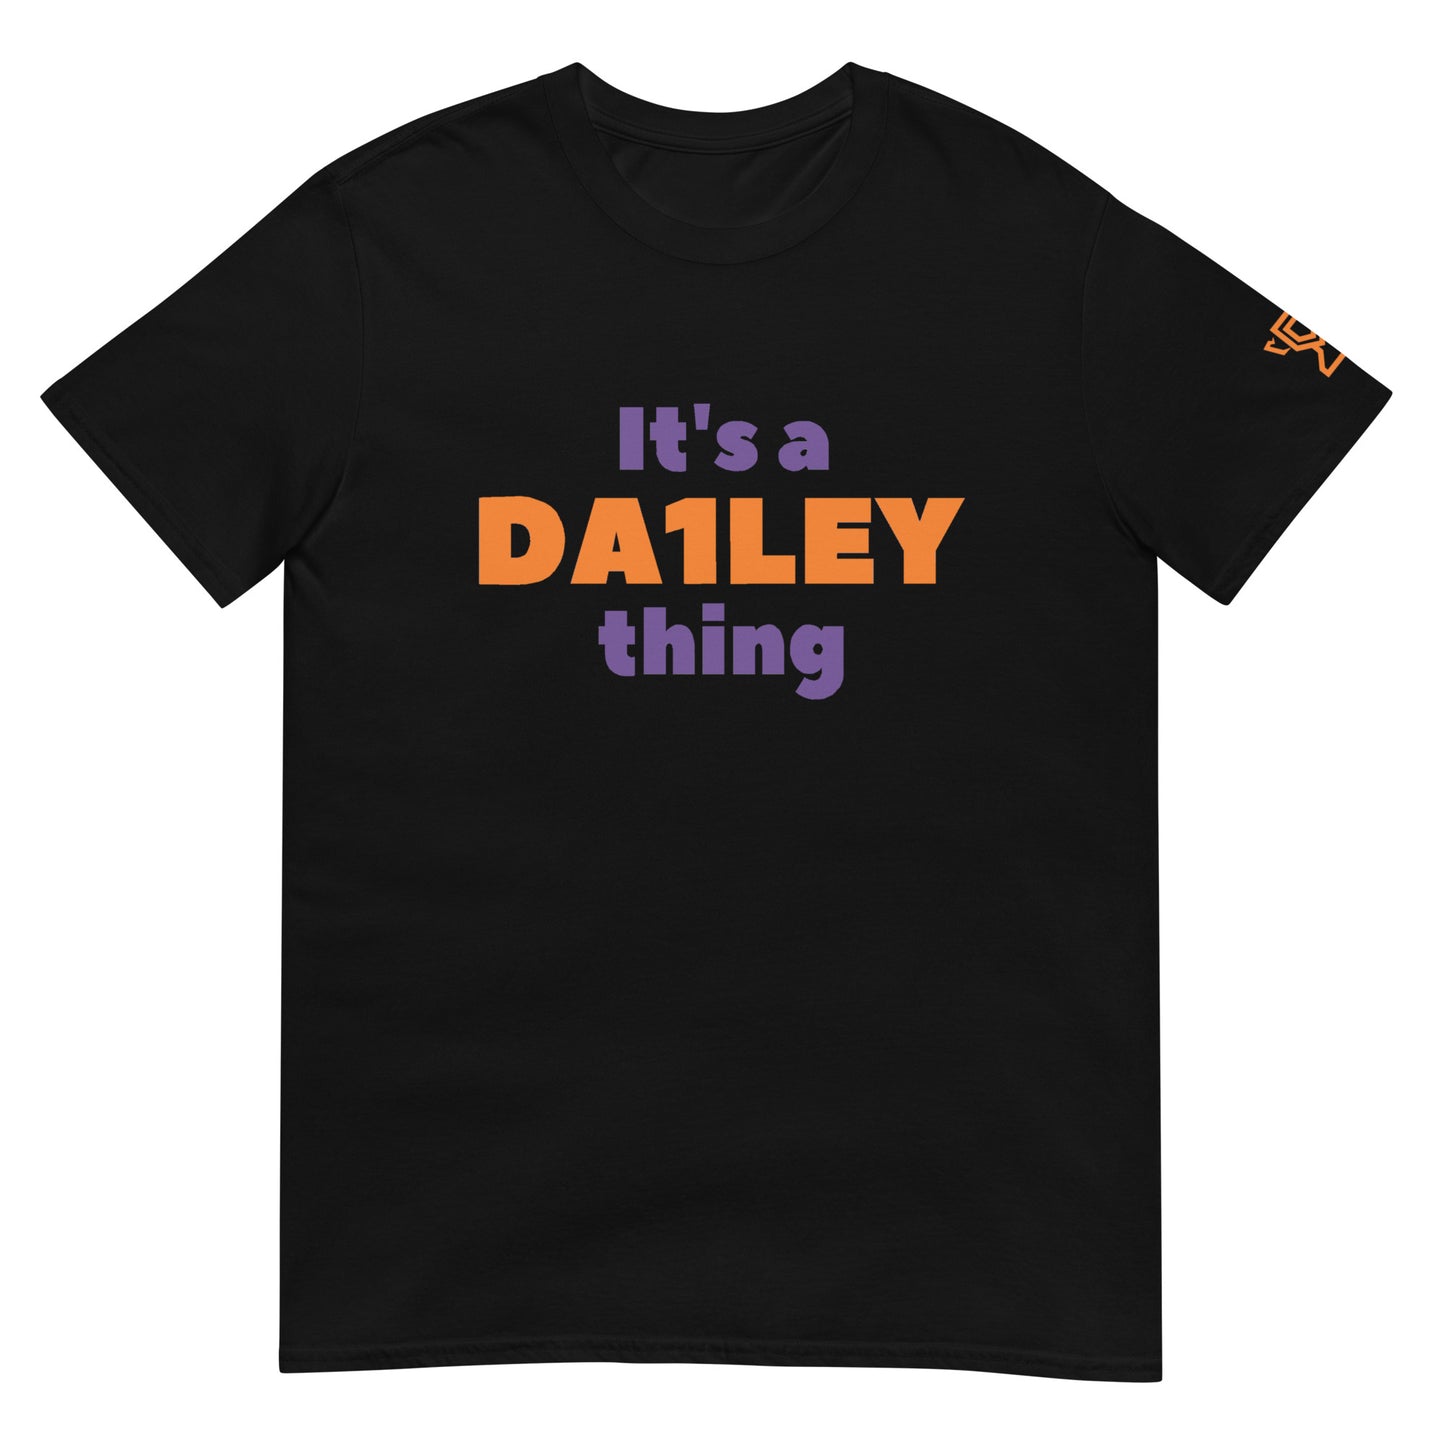 Black t-shirt with the quote "It's a Da1ley thing".